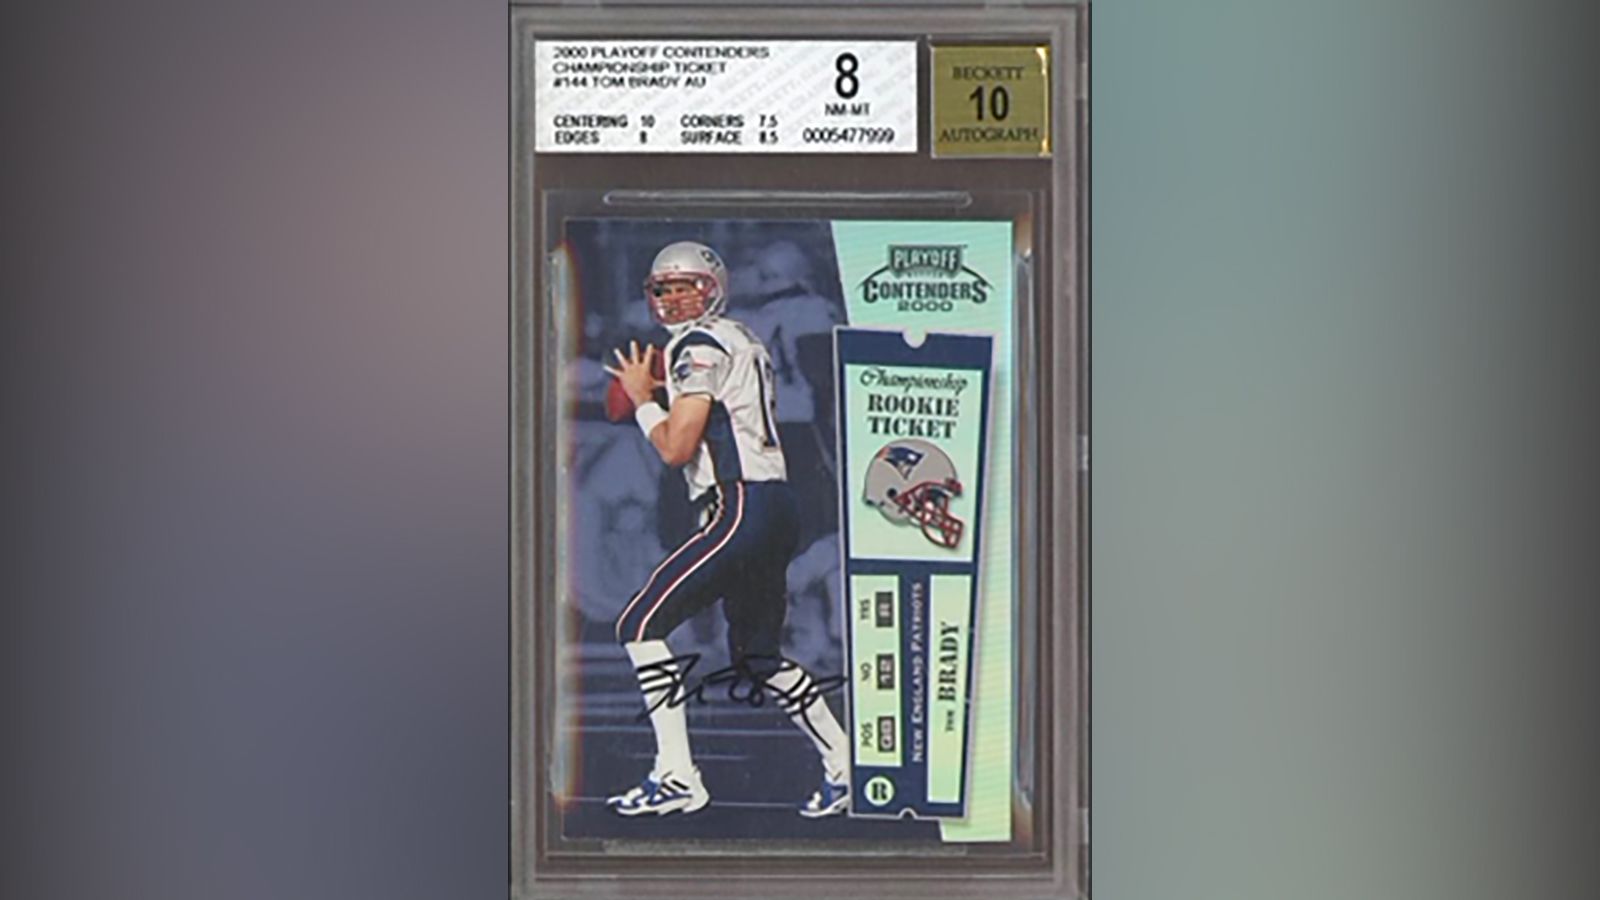 The autographed 2000 Playoff Contenders Championship Ticket card.